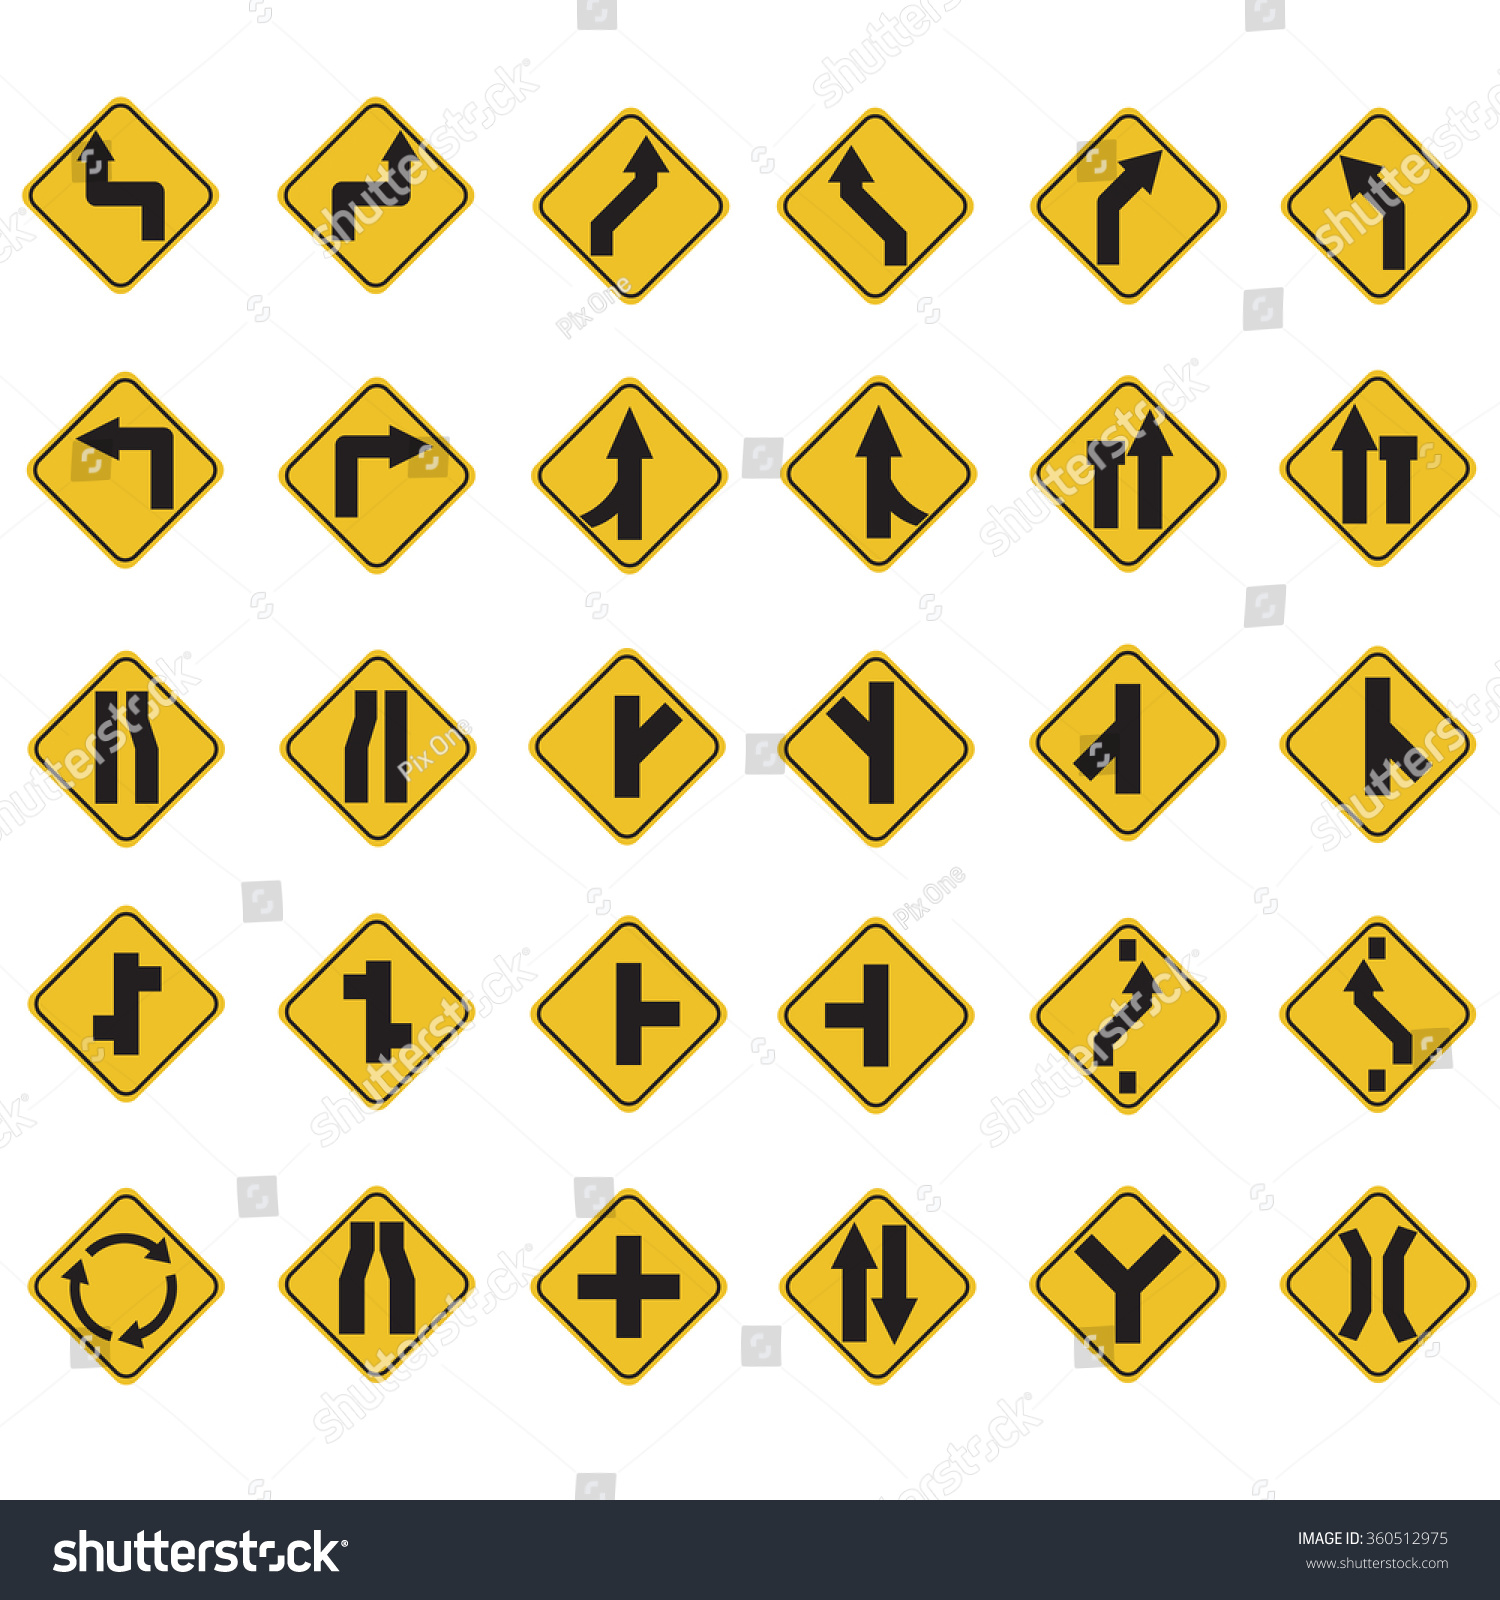 Yellow Road Signs, Traffic Signs Vector Set On White Background. A Set ...